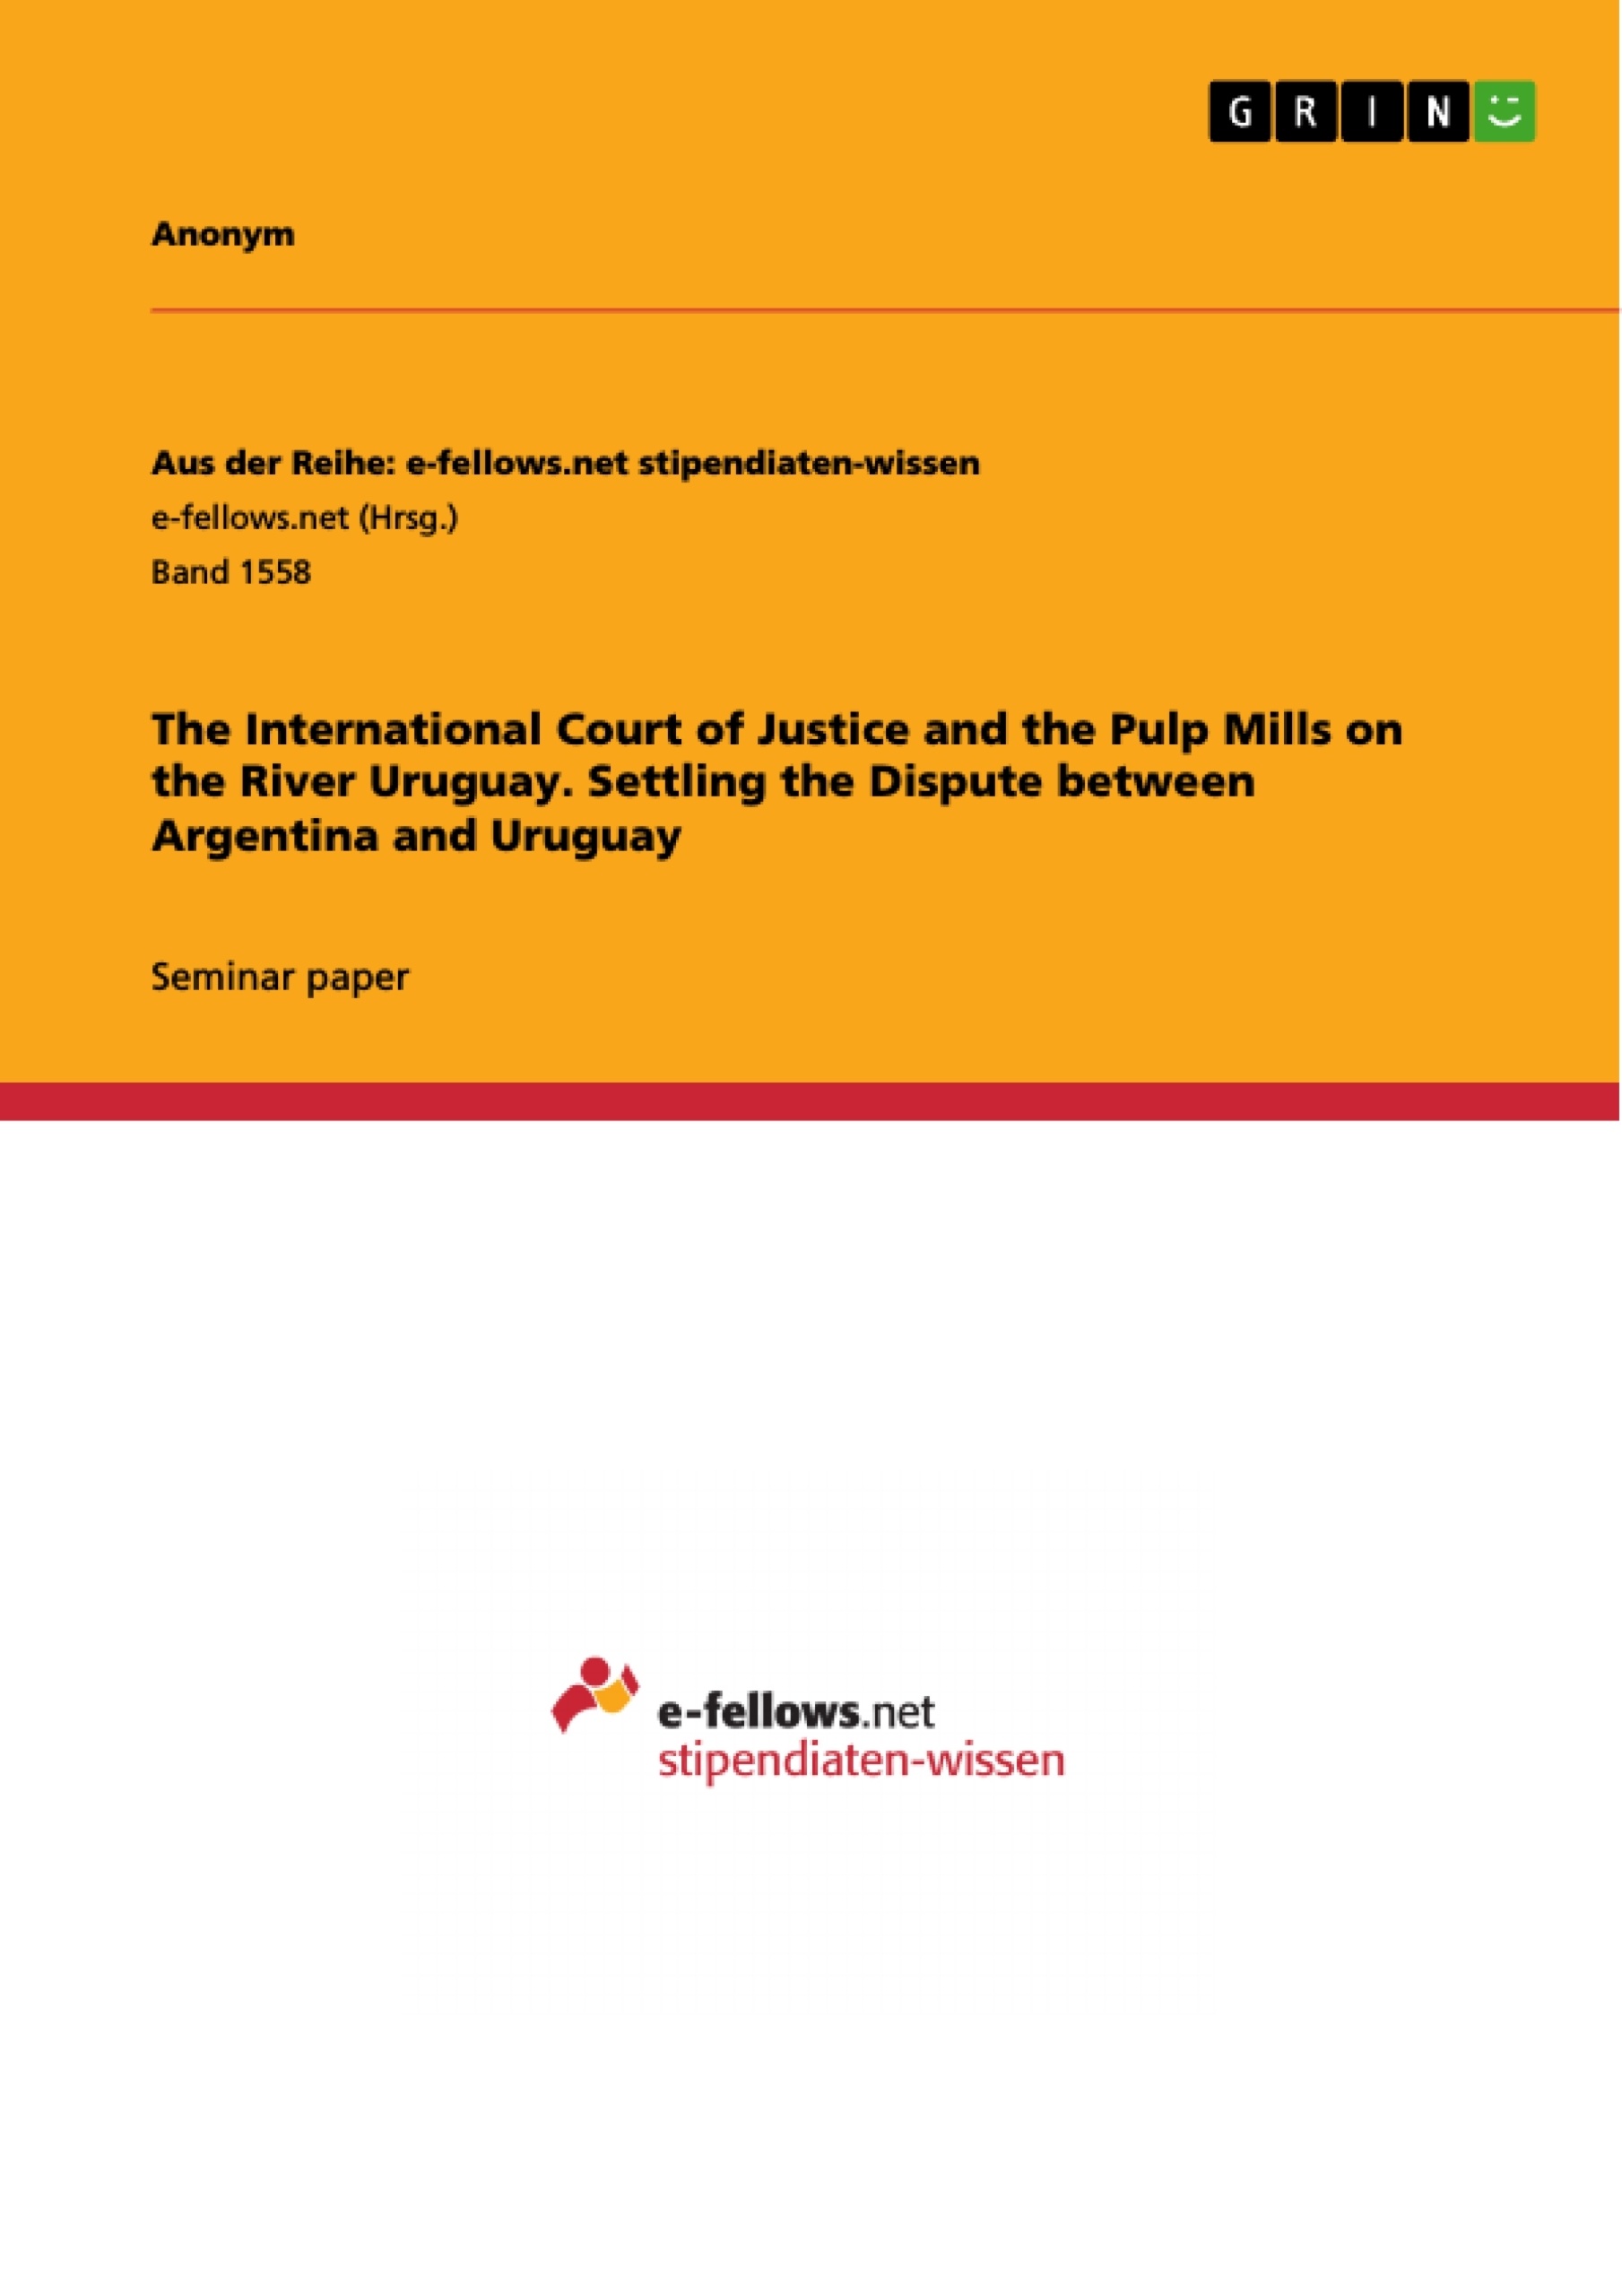 Titel: The International Court of Justice and the Pulp Mills on the River Uruguay. Settling the Dispute between Argentina and Uruguay